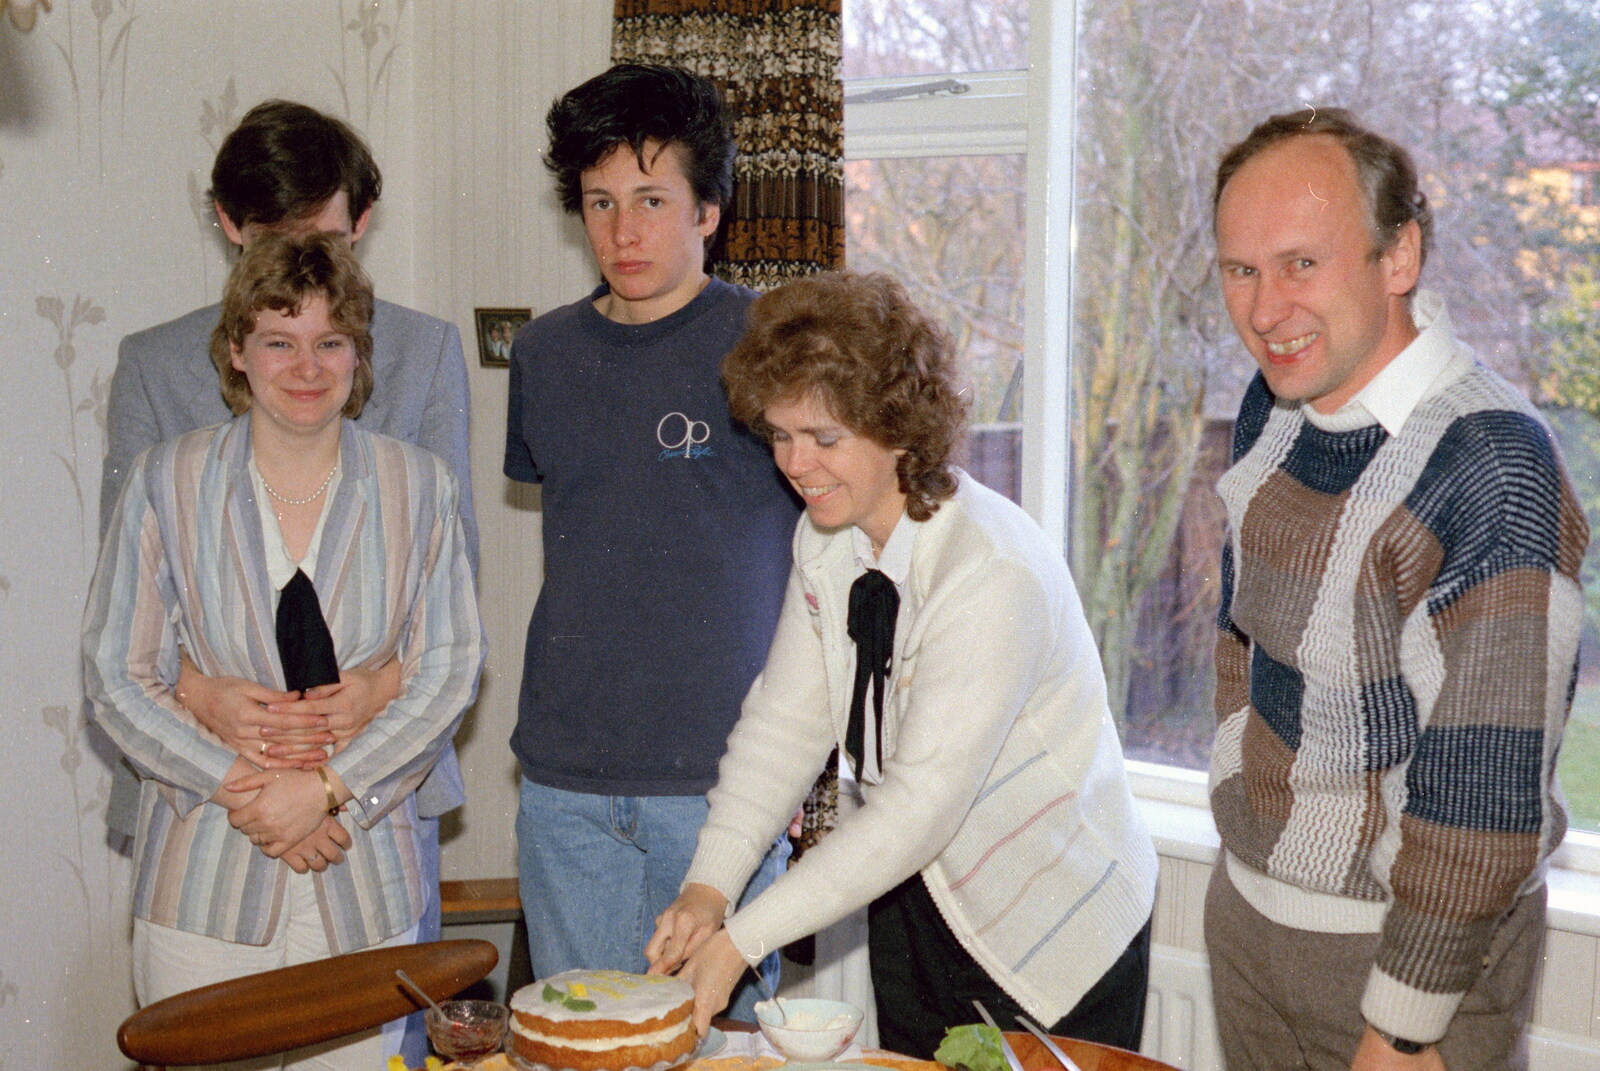 Berenice cuts the cake as Chris looks up from The Last Day of Term, and Leaving New Milton, Hampshire - 18th September 1985